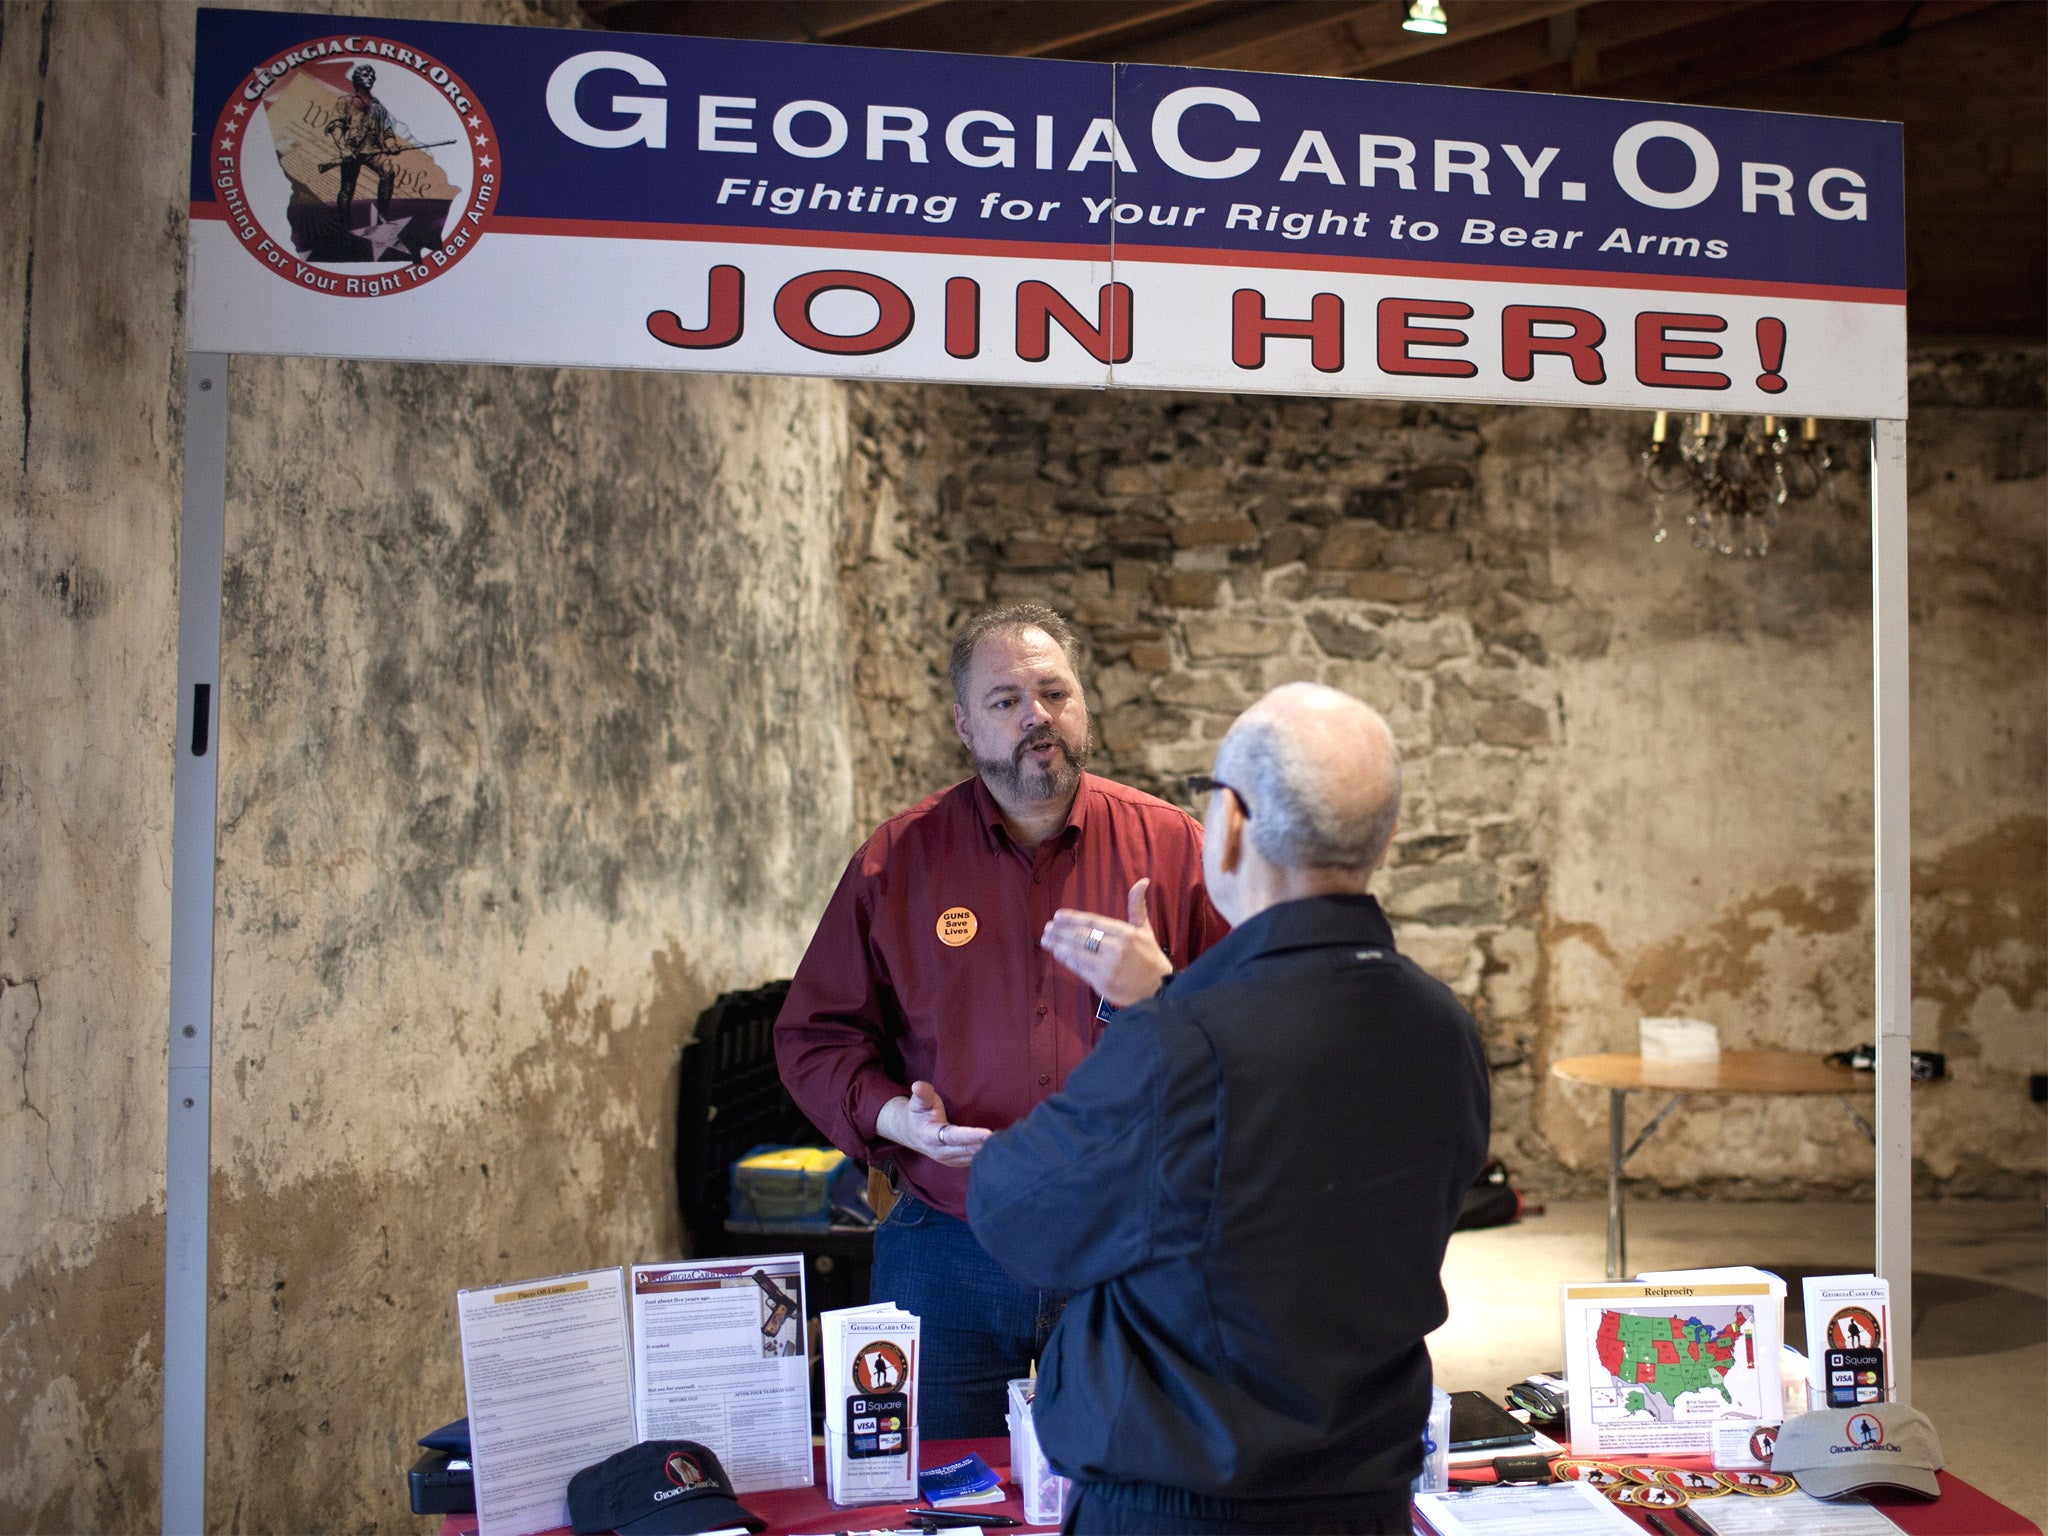 A member of the pro-gun group Georgia Carry puts forward his views at a Republican Party meeting in the state (Getty)